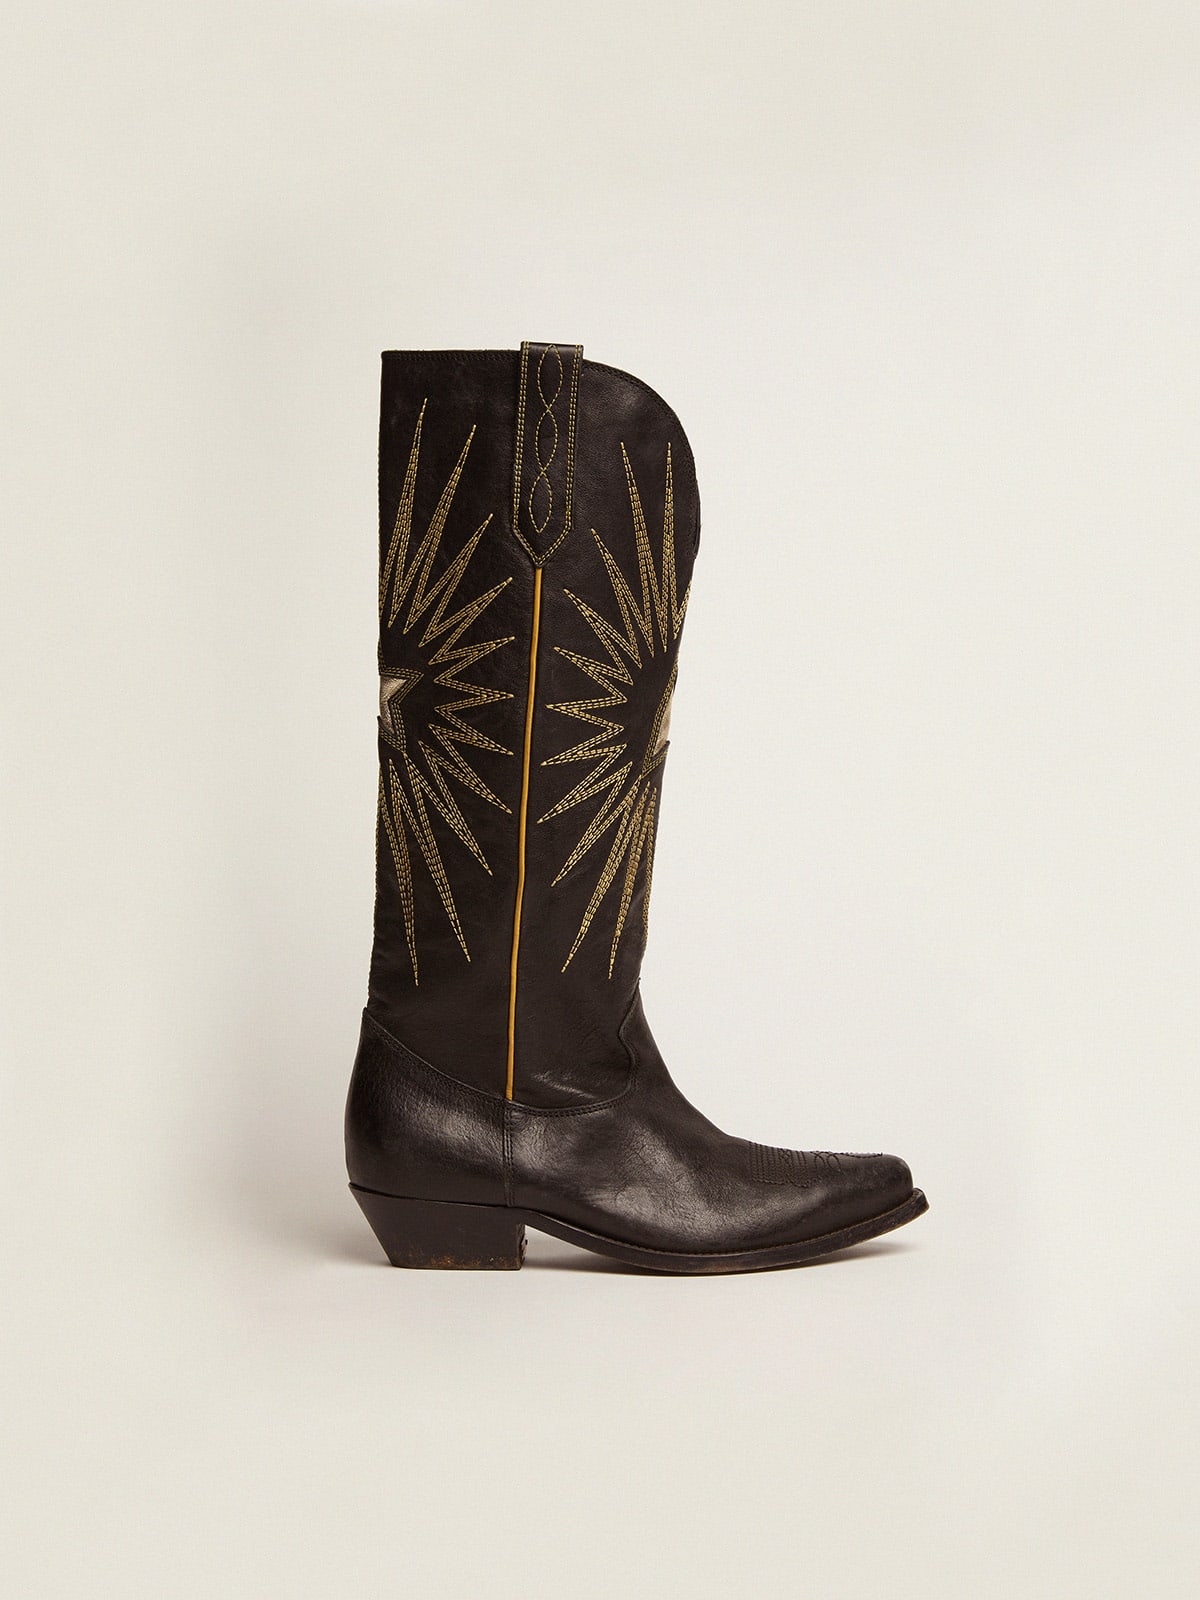 Golden Goose - Wish Star boots in black leather with platinum laminated leather inlay star in 